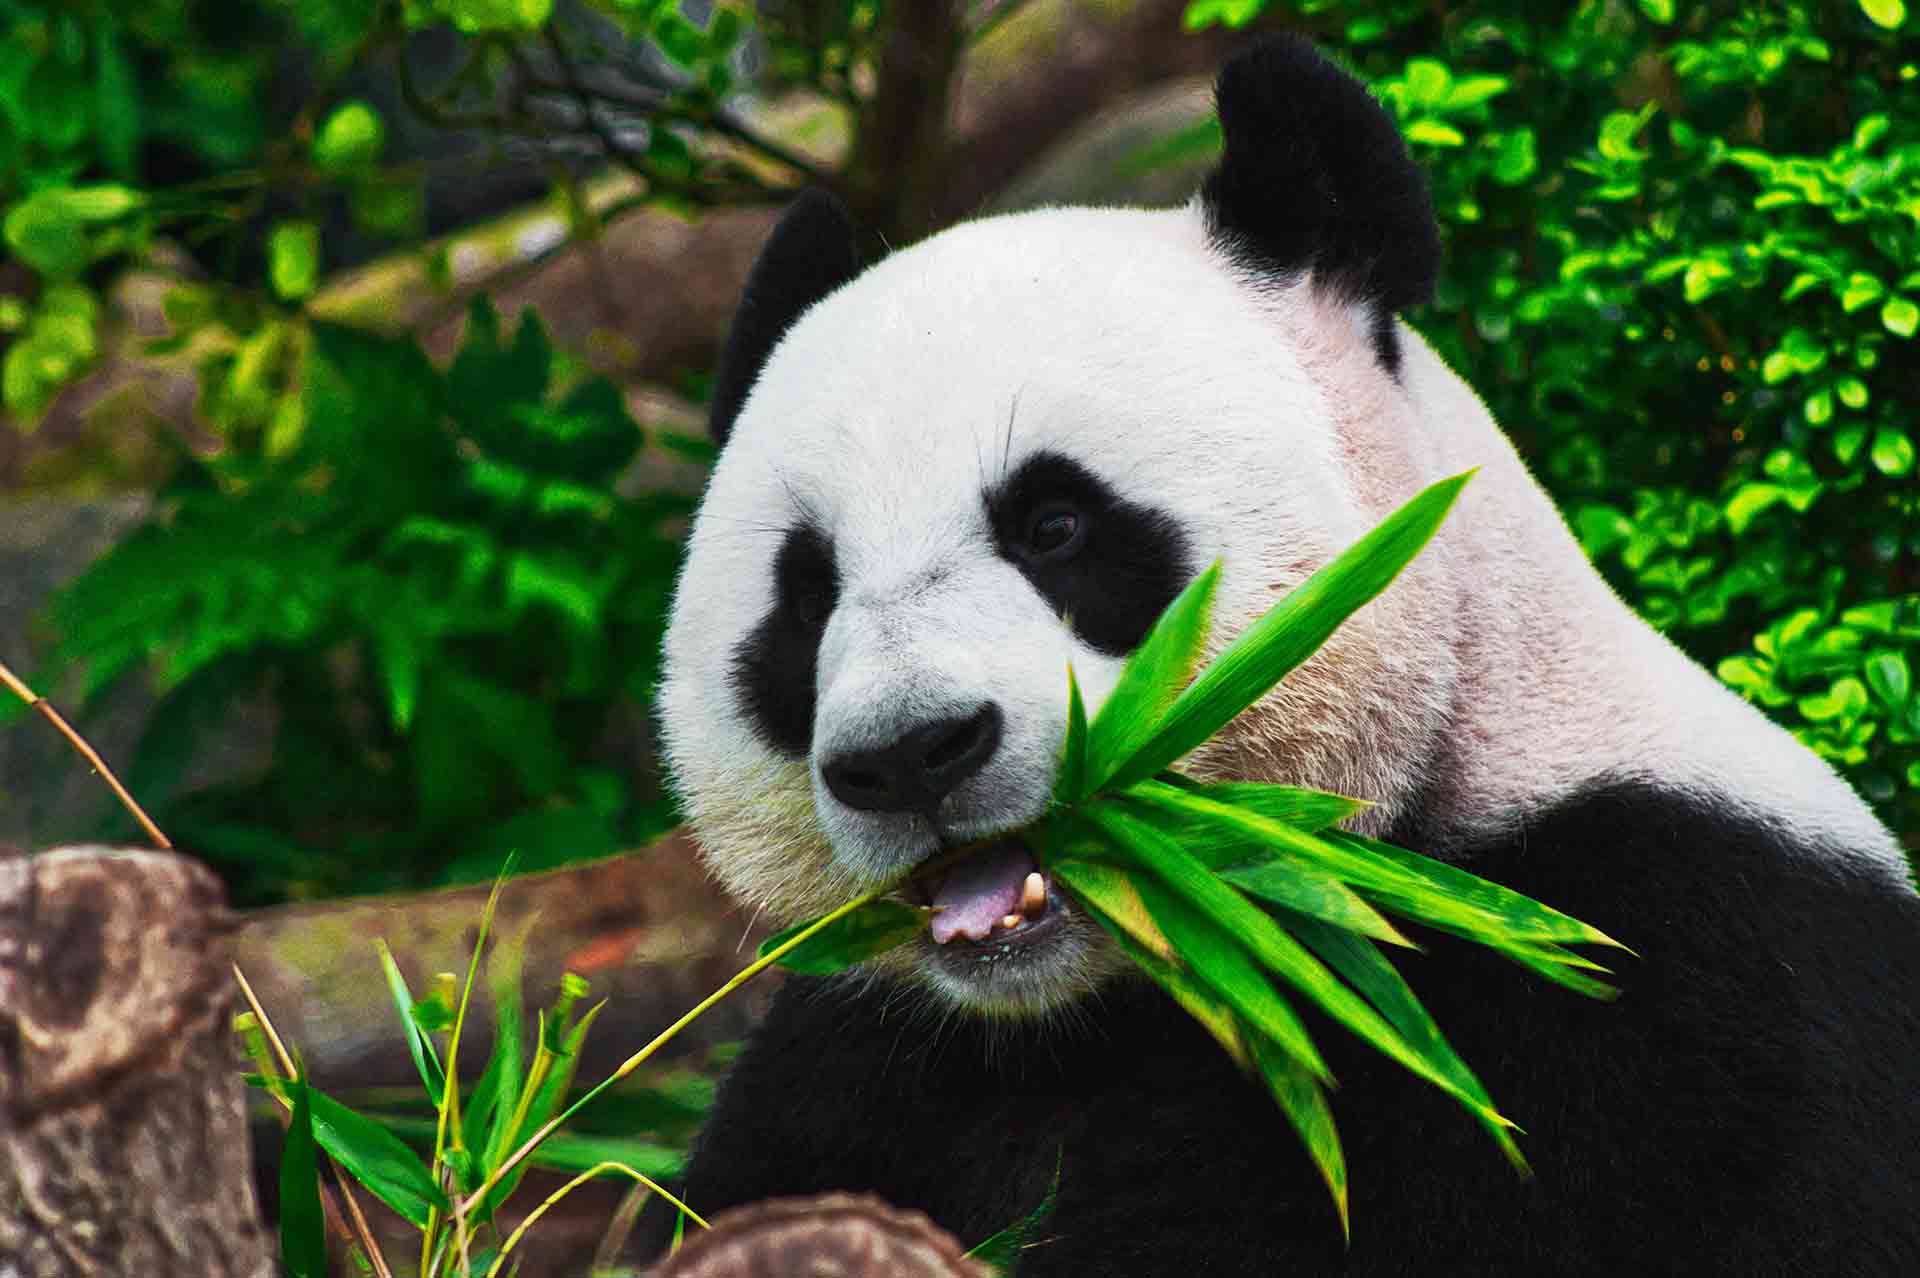 Researchers have discovered how pandas are able to gain weight on a bamboo diet